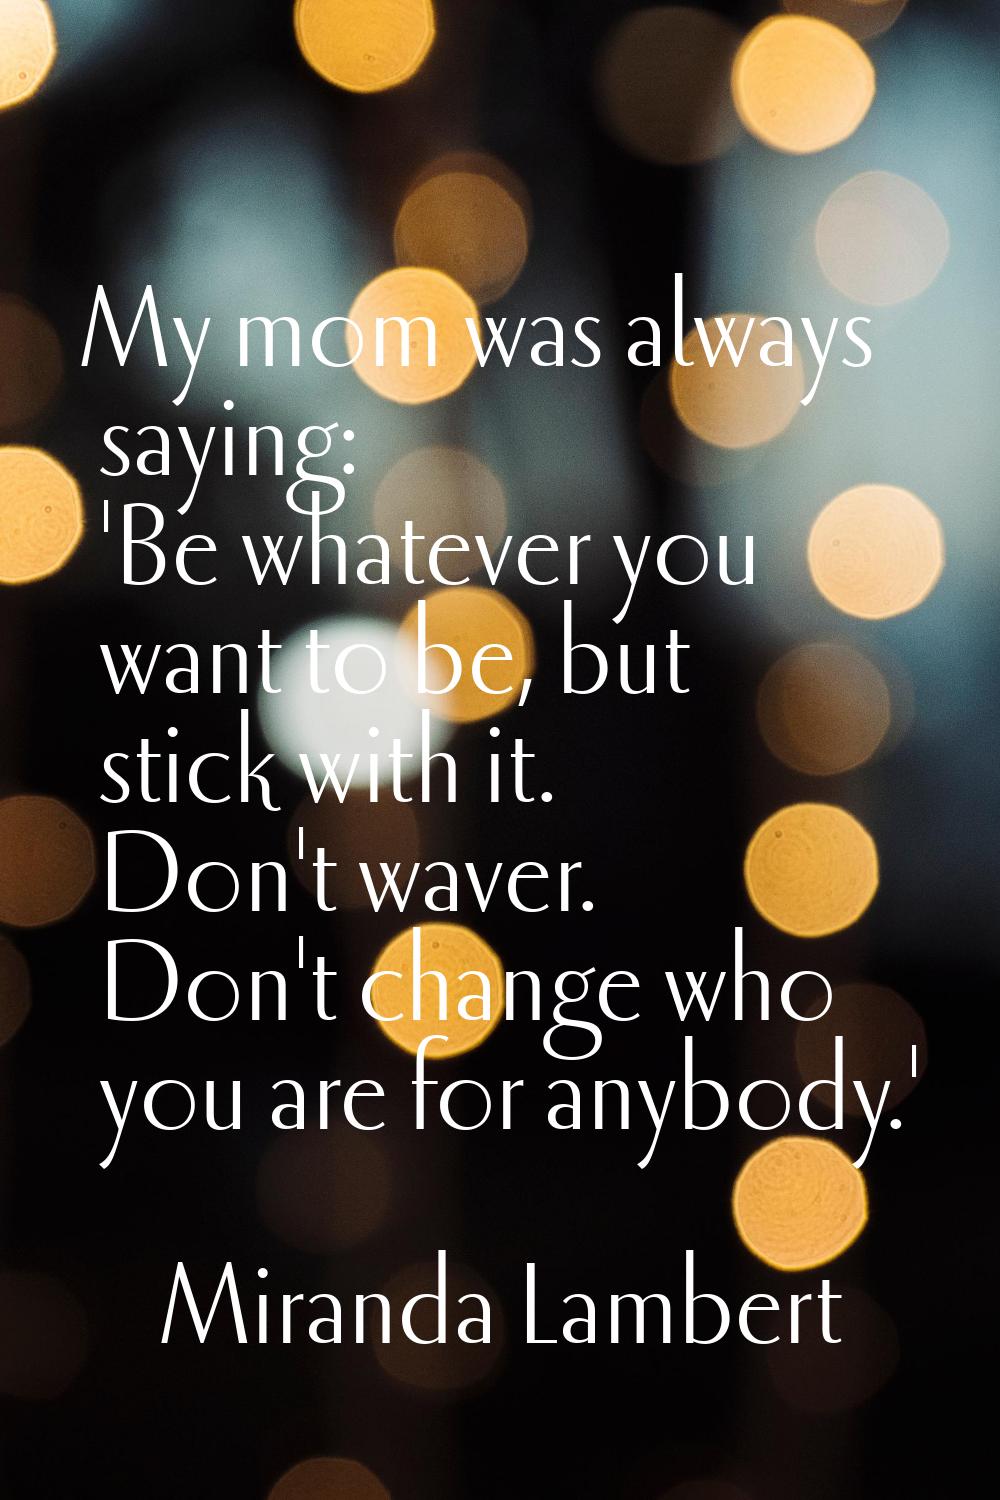 My mom was always saying: 'Be whatever you want to be, but stick with it. Don't waver. Don't change